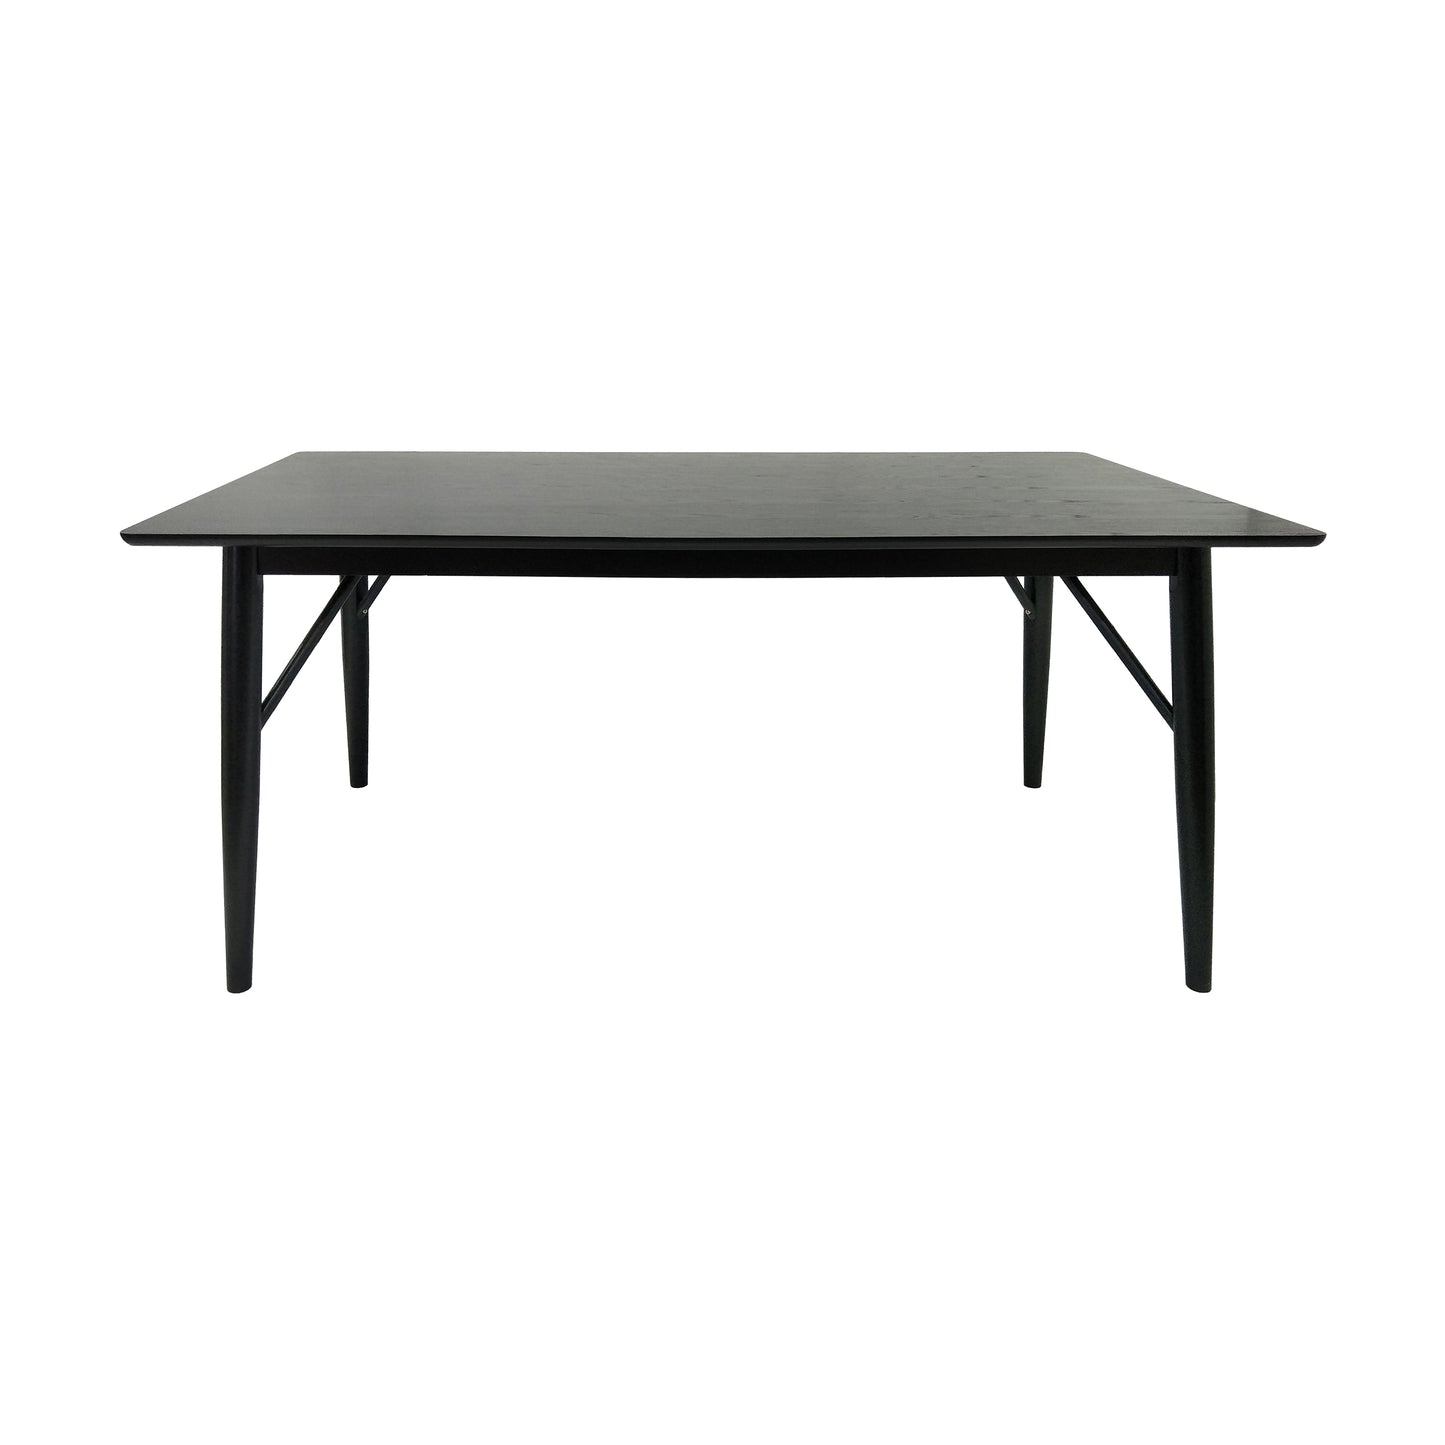 Freesia Contemporary Wooden Rectangular Dining Table, Black